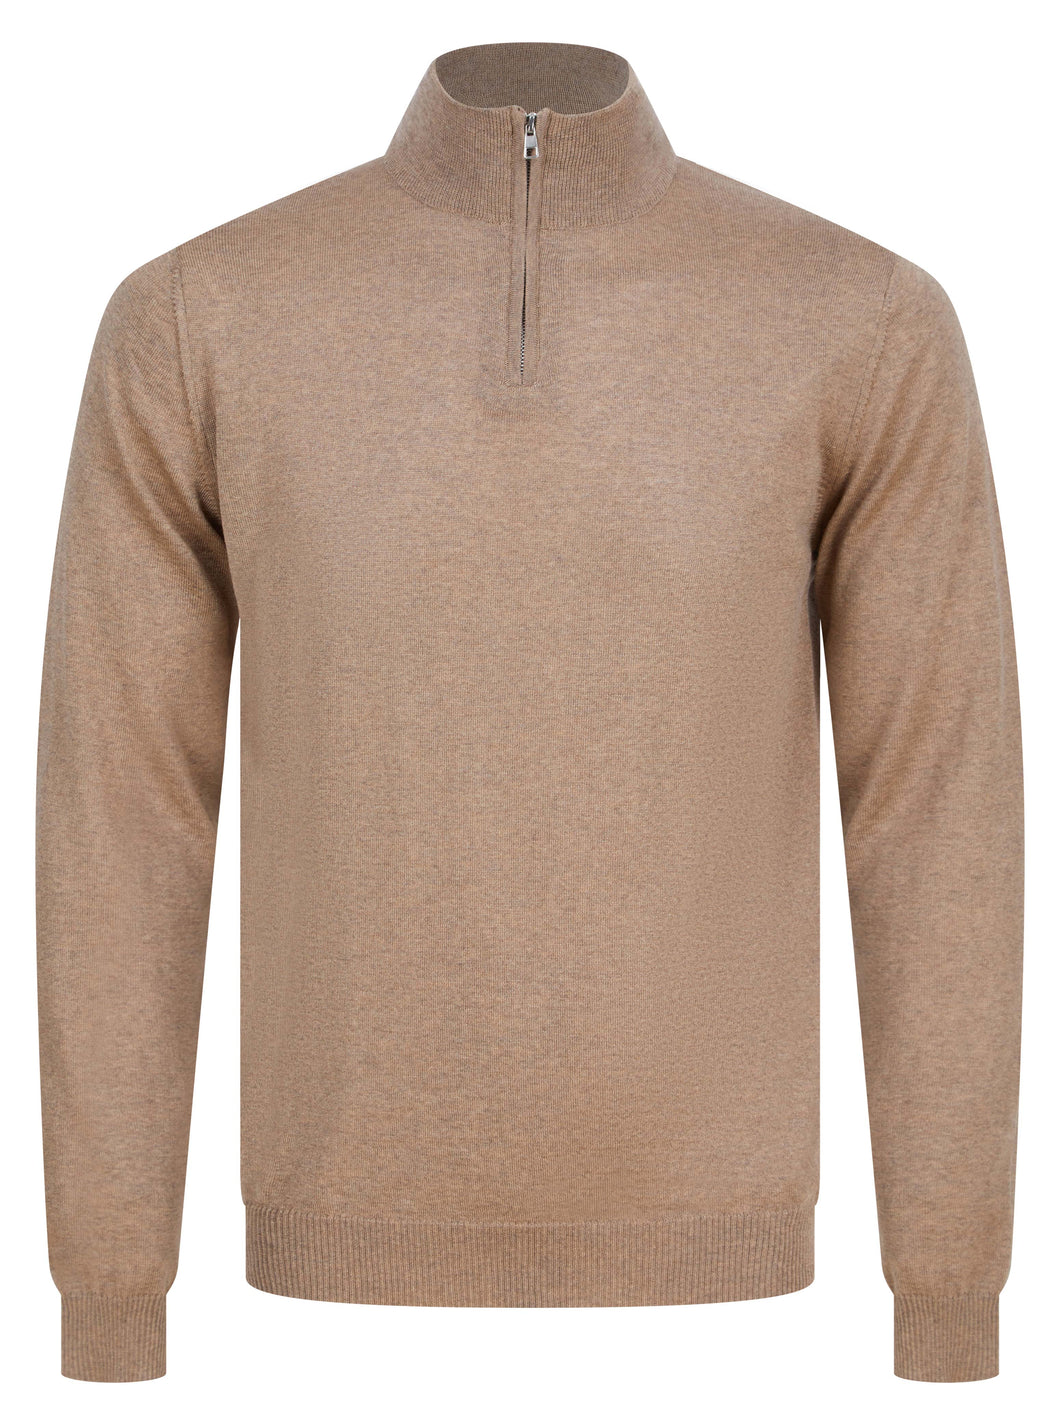 Oliver Sweeney Curragh 1/4 Zip Knit Oatmeal